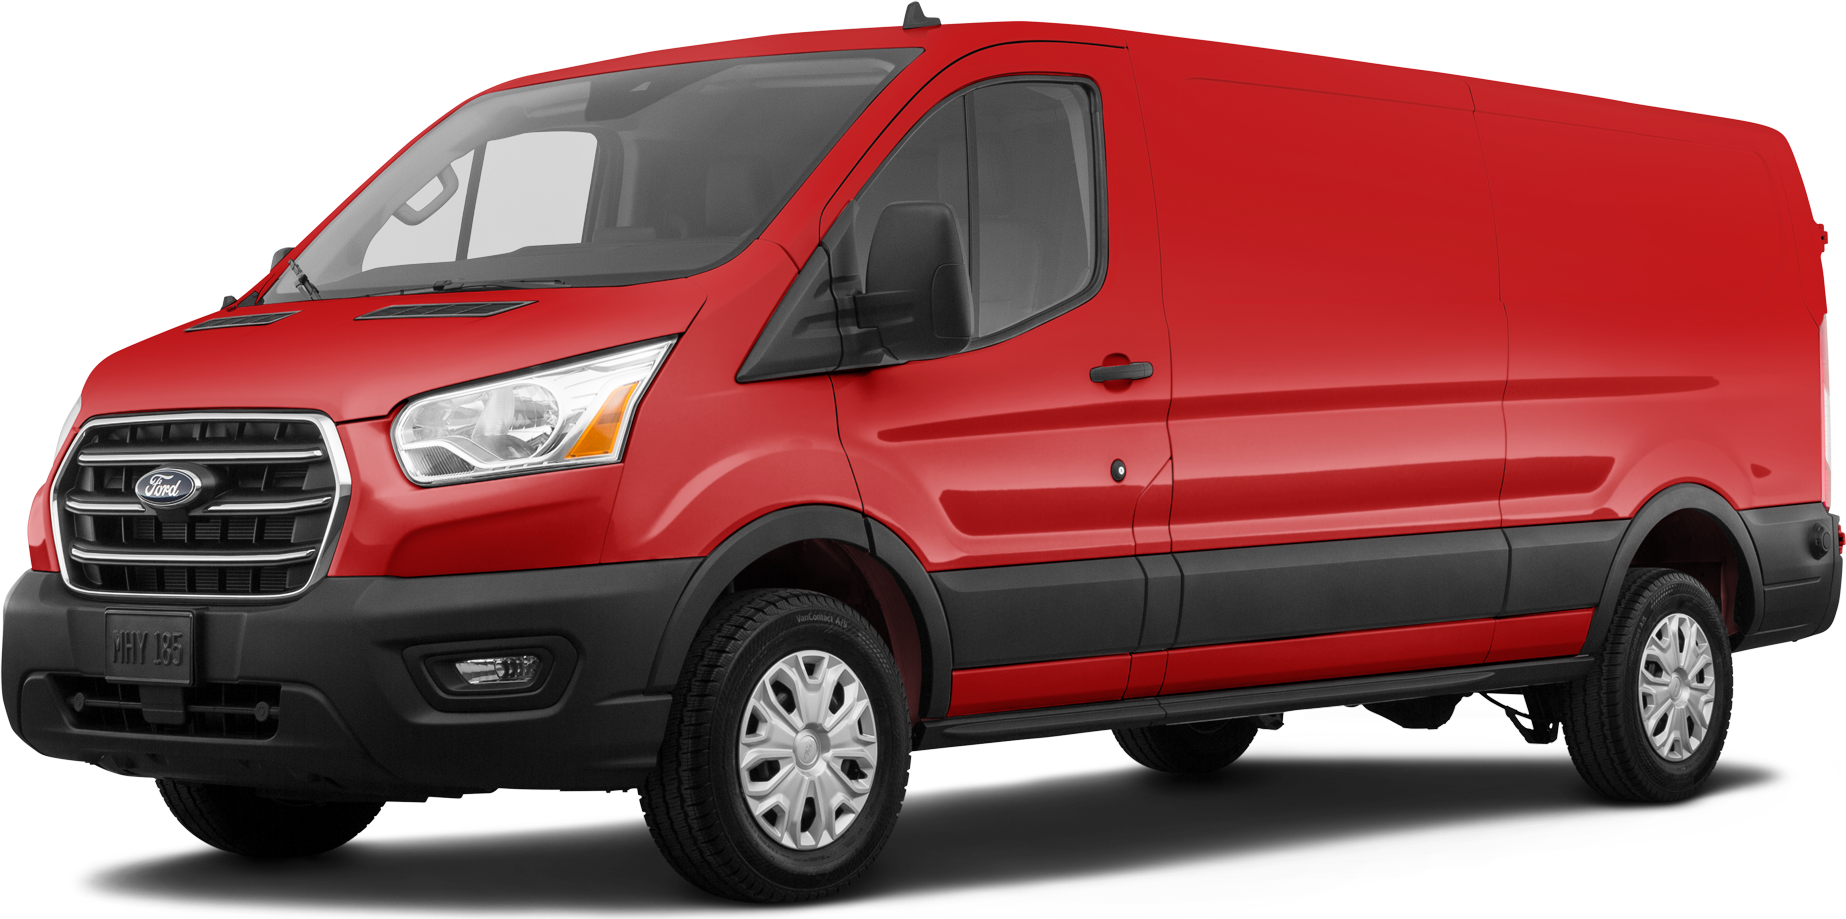 New 2022 Ford Transit 350 HD Cargo Van Reviews, Pricing & Specs